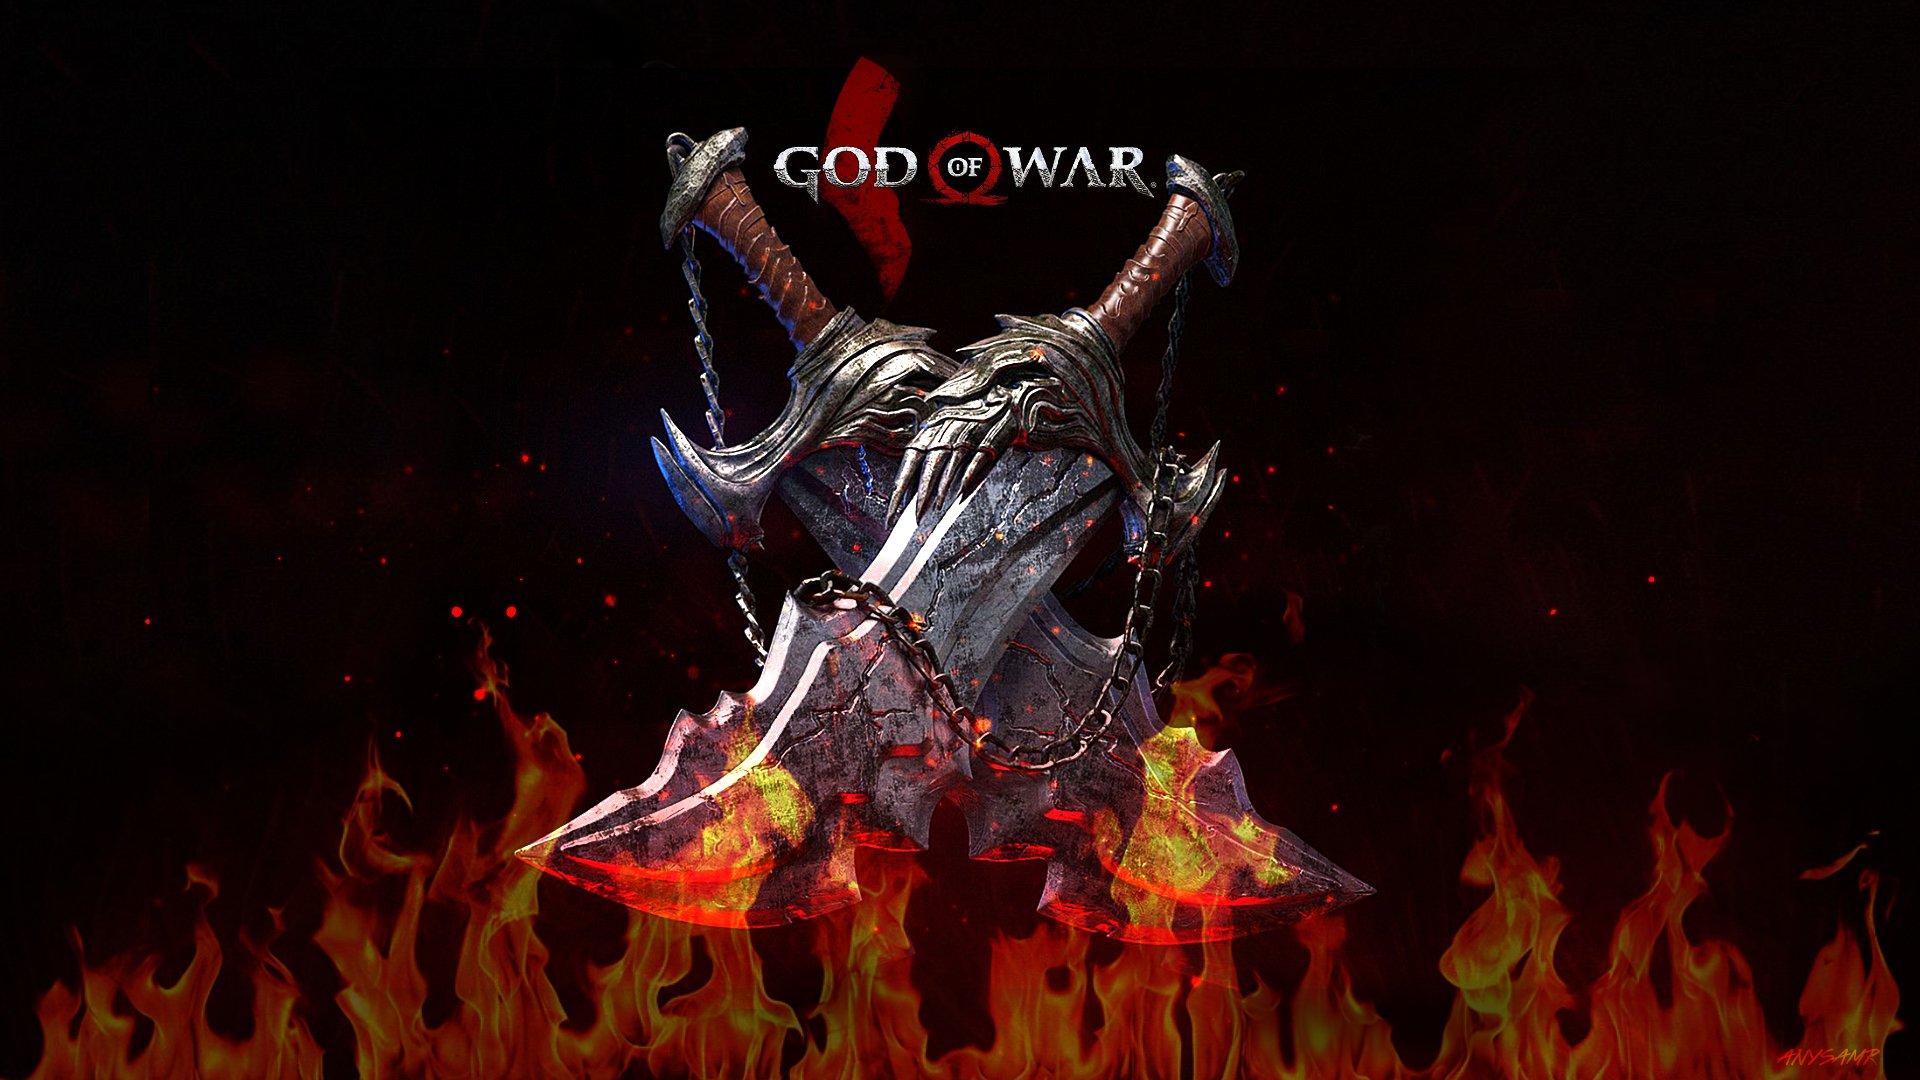 Blades of Chaos (God of War) HD Wallpaper. Background Image